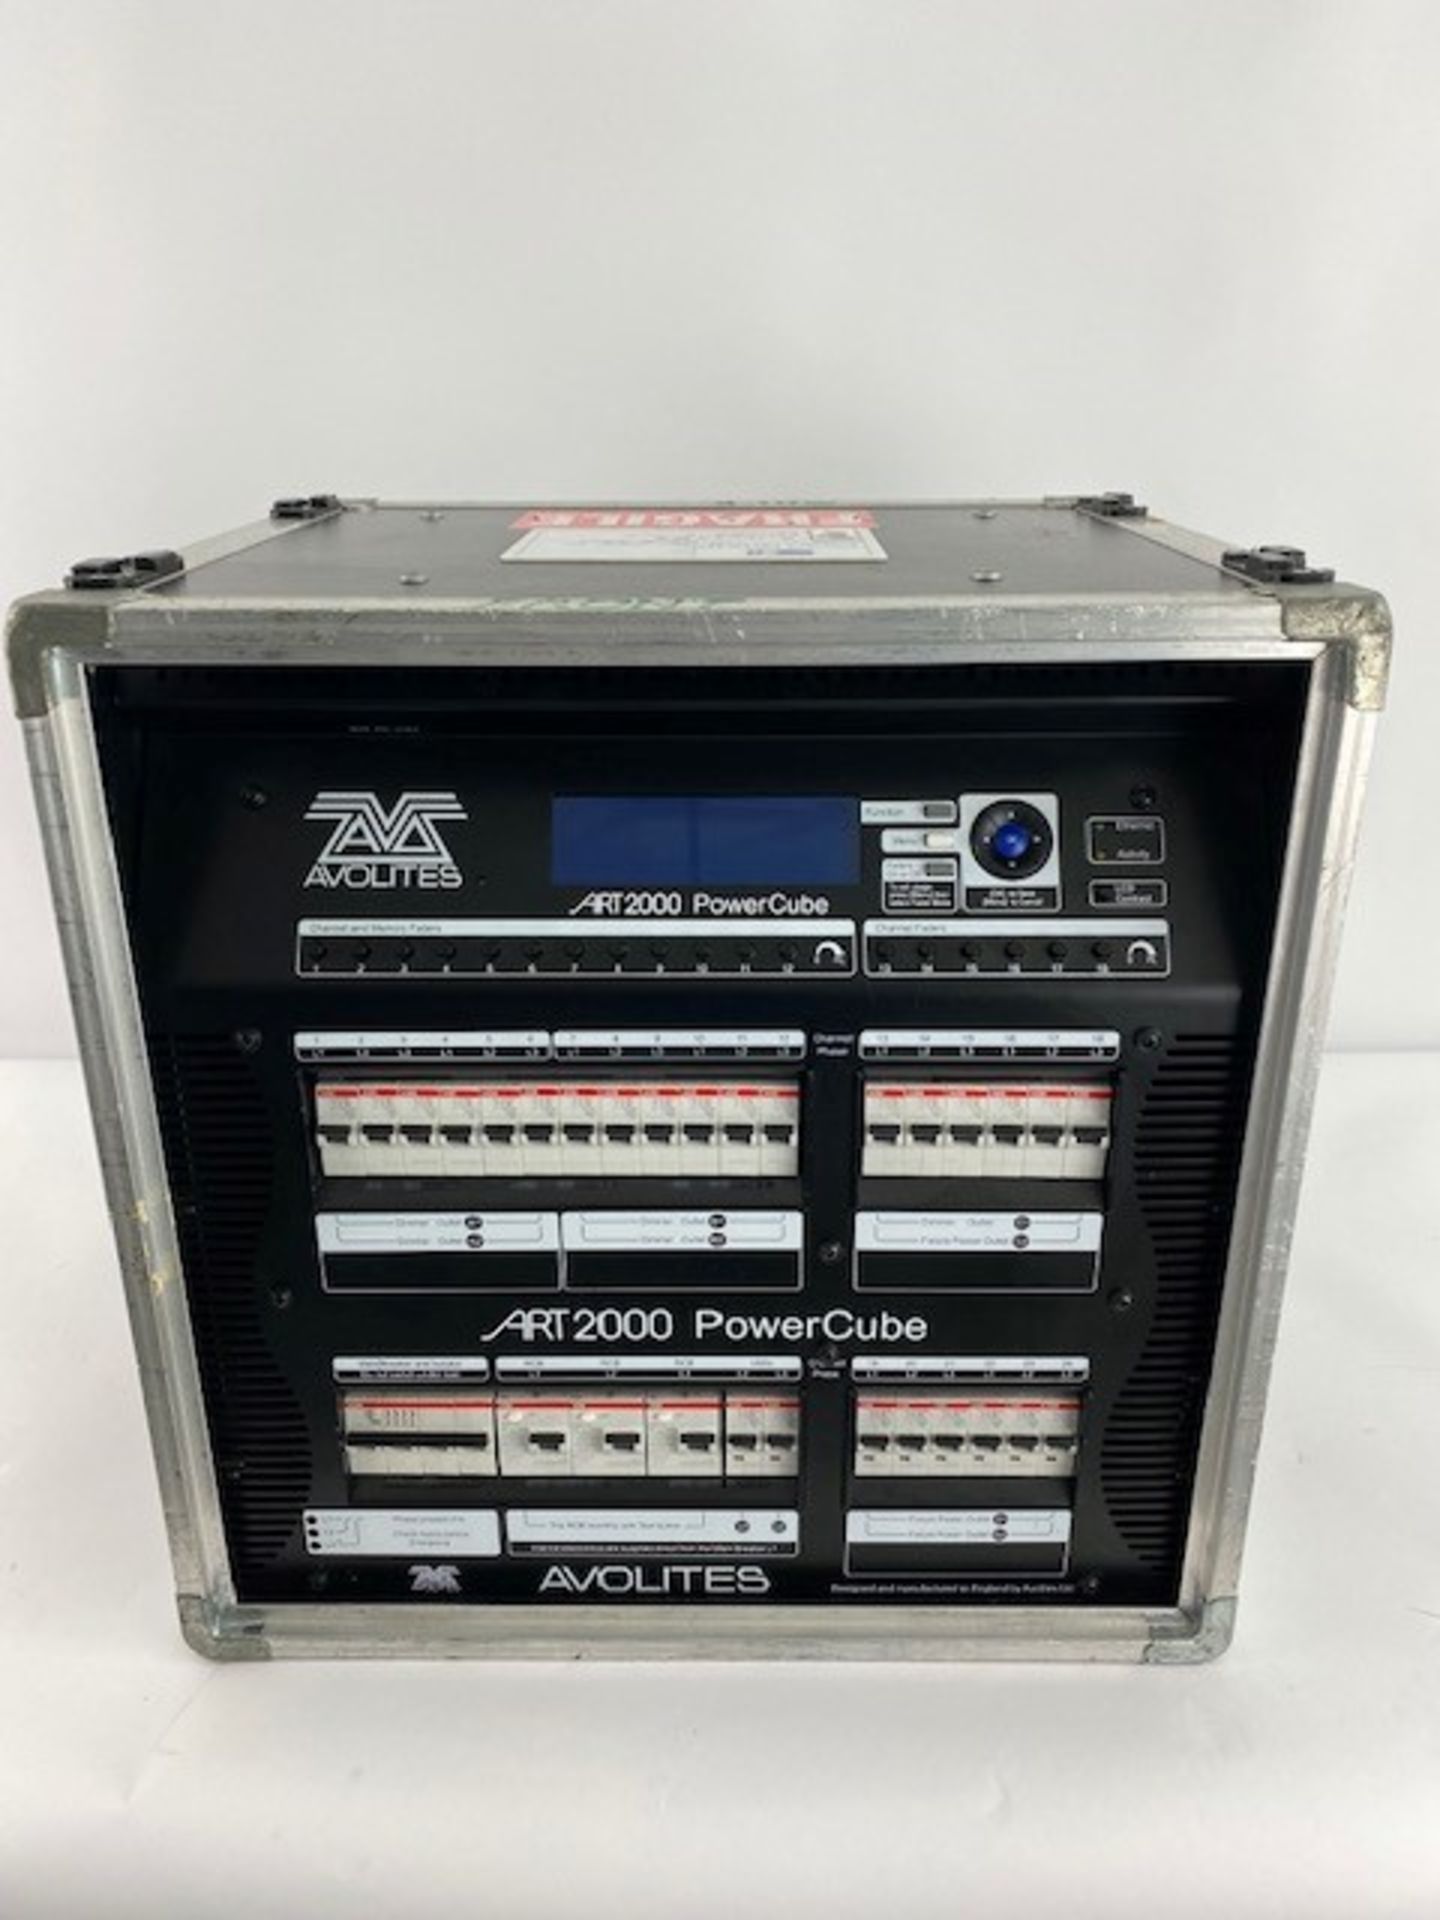 1 x Avolites Art 2000 Power Cube Dimming System - Ref: 75 - CL581 - Location: Altrincham WA14 A - Image 2 of 4